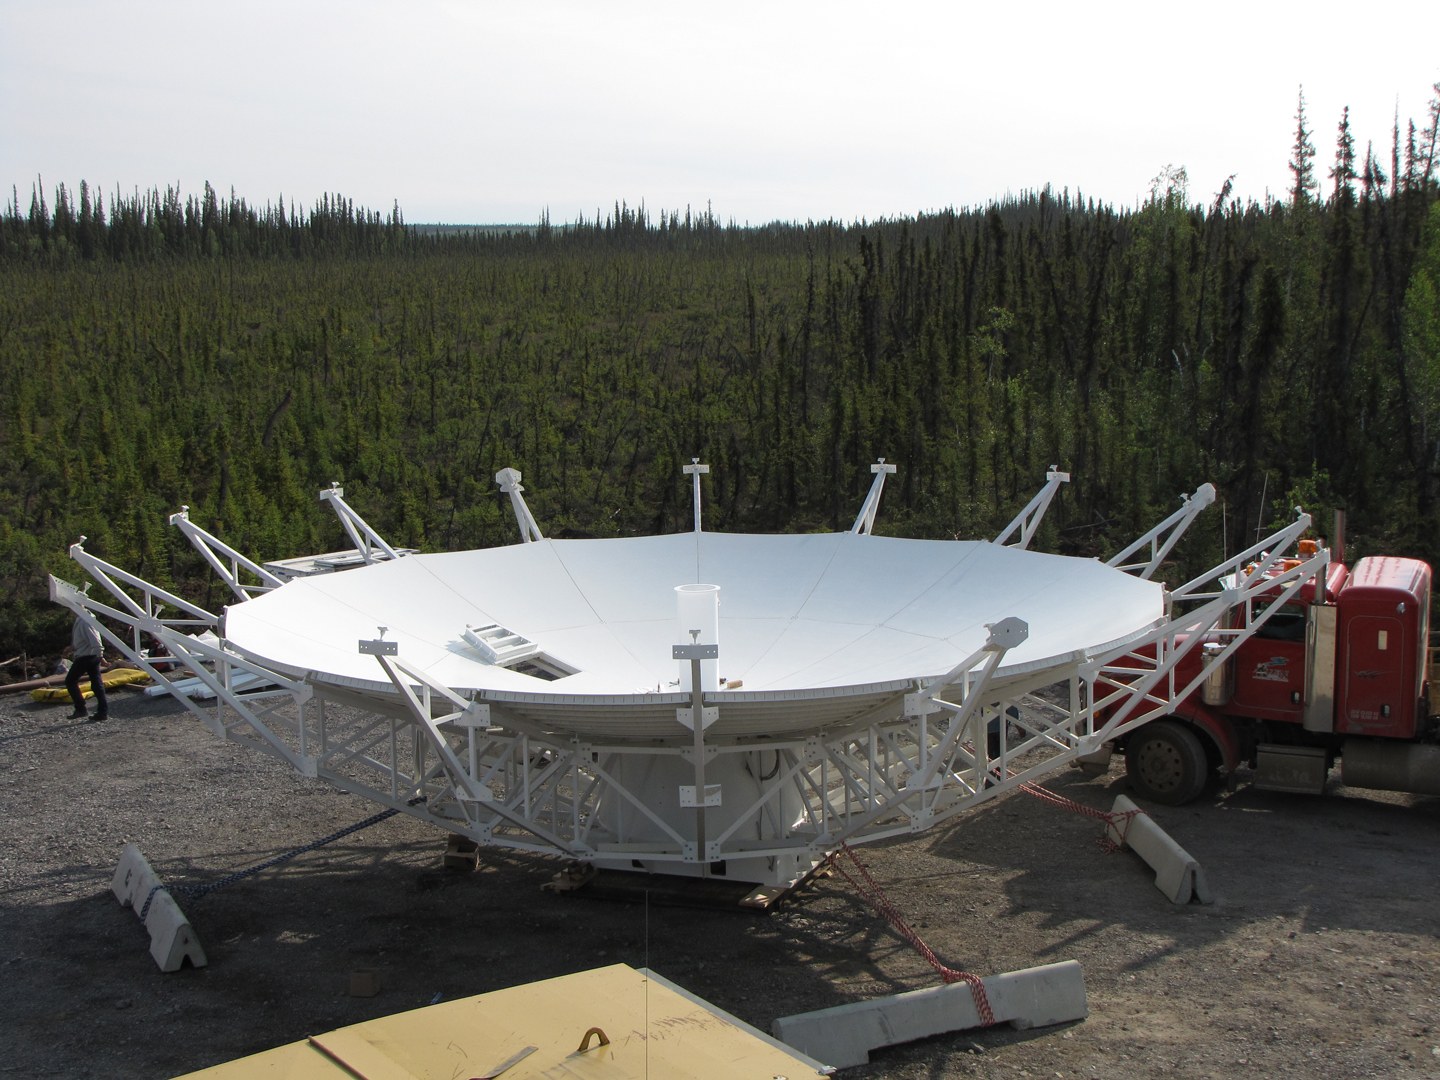 The 13-metre reflector of the antenna